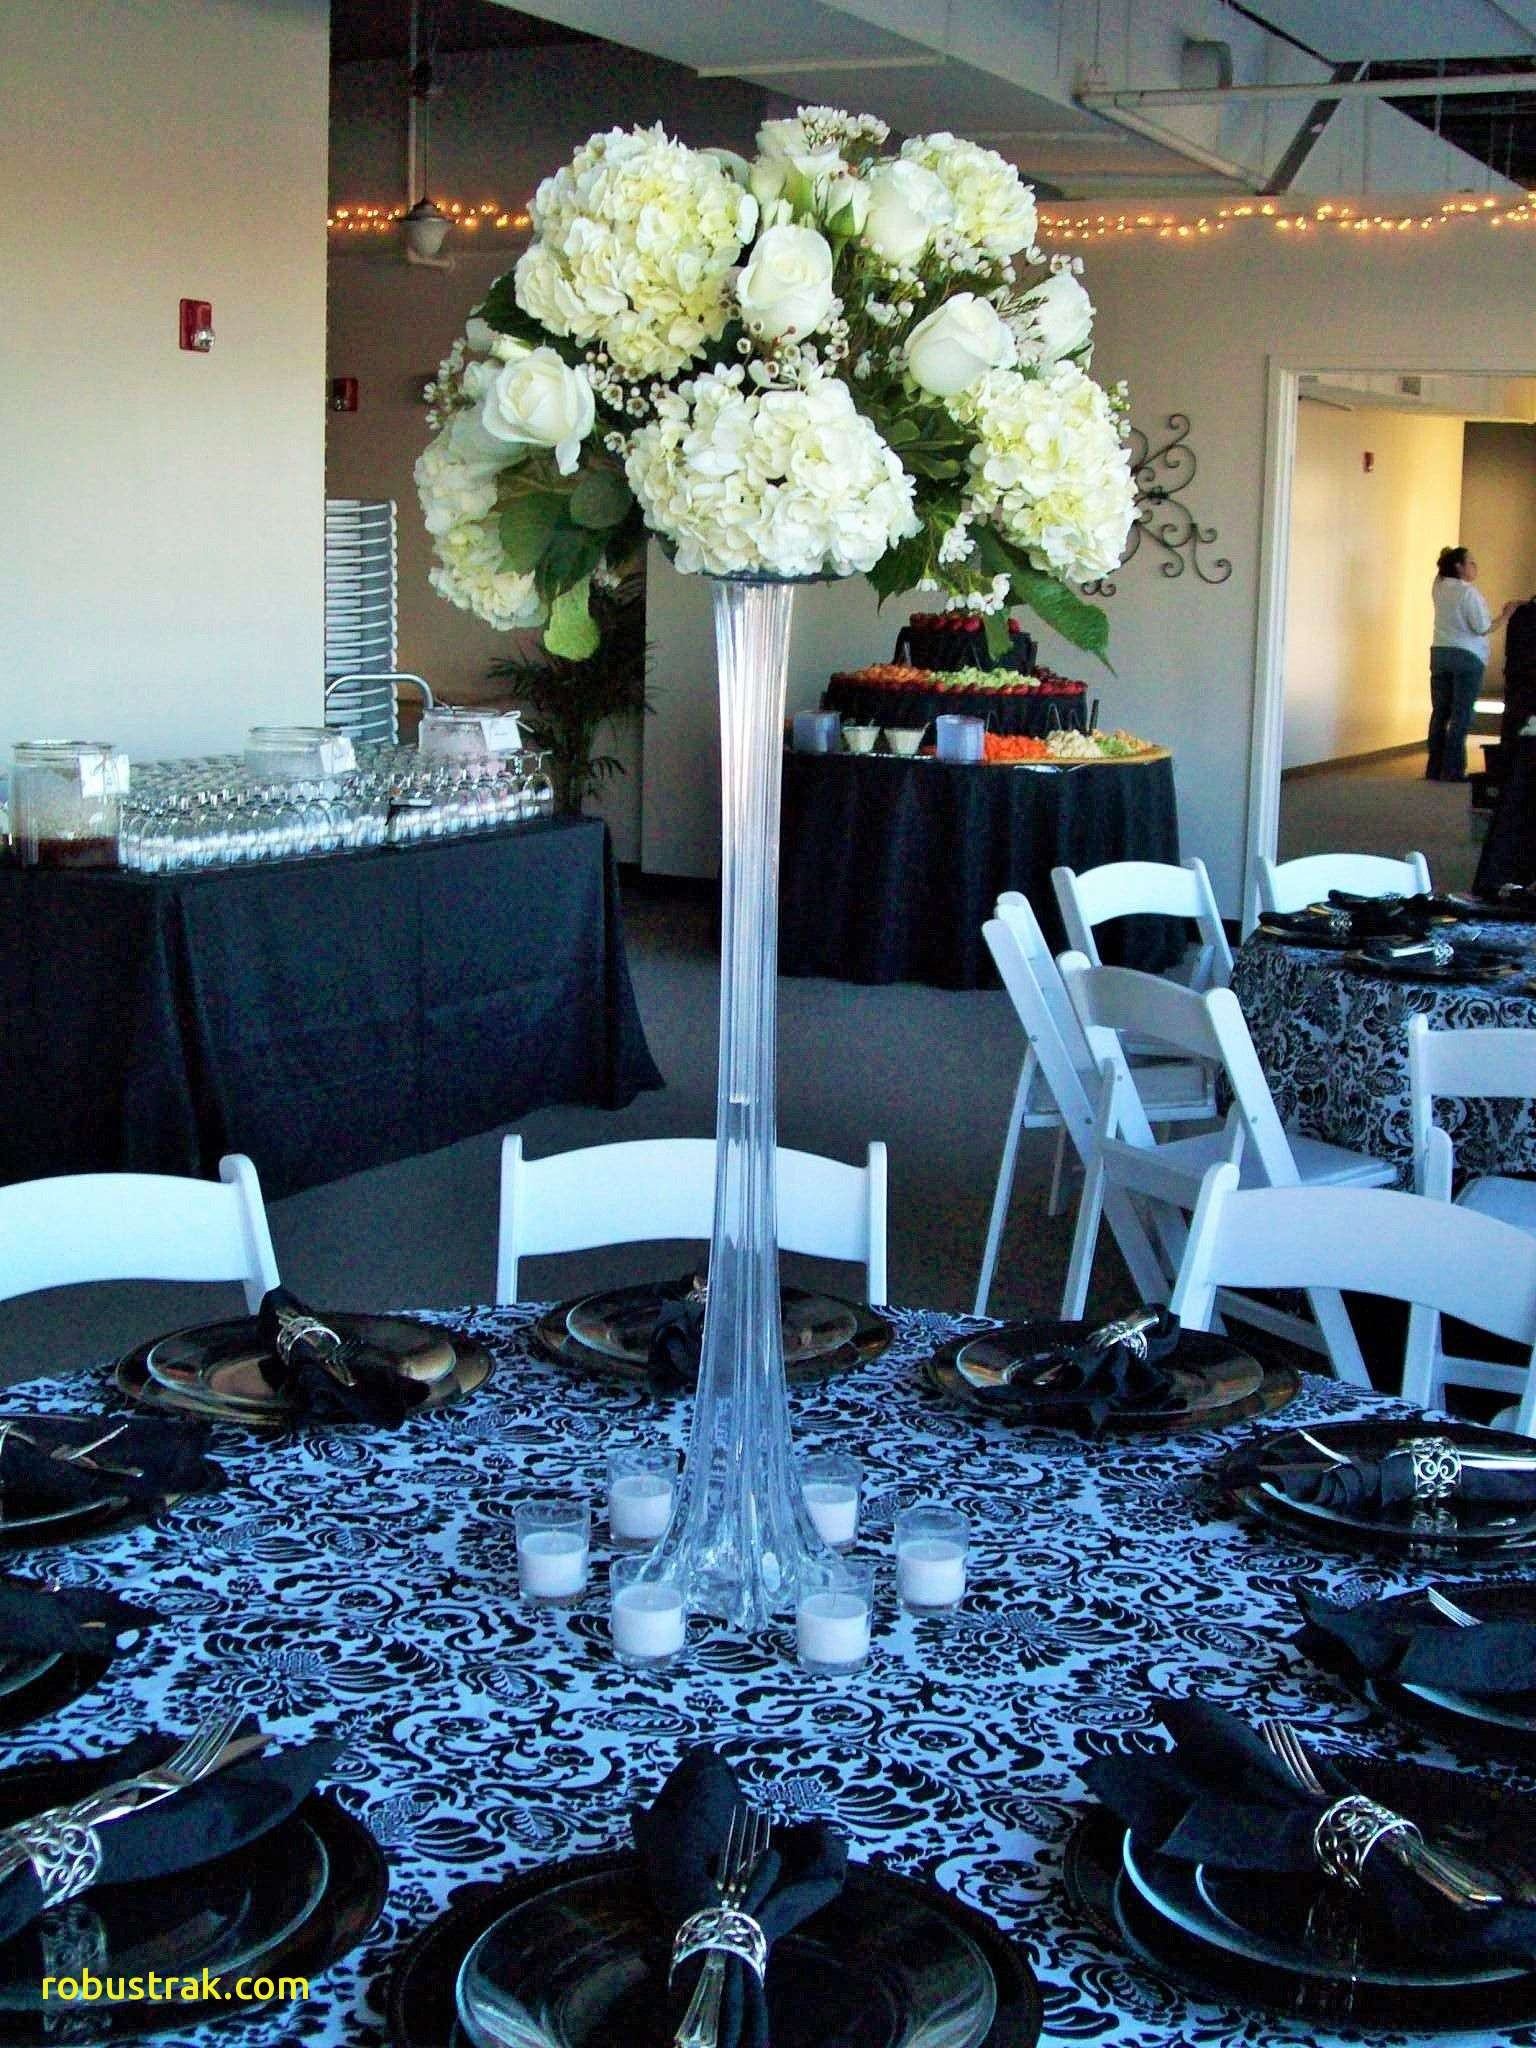 22 Lovely Tall Glass Vases for Centerpieces 2024 free download tall glass vases for centerpieces of tall glass table decorations awesome tall glass vase wedding intended for tall glass table decorations awesome tall glass vase wedding centerpiece with w